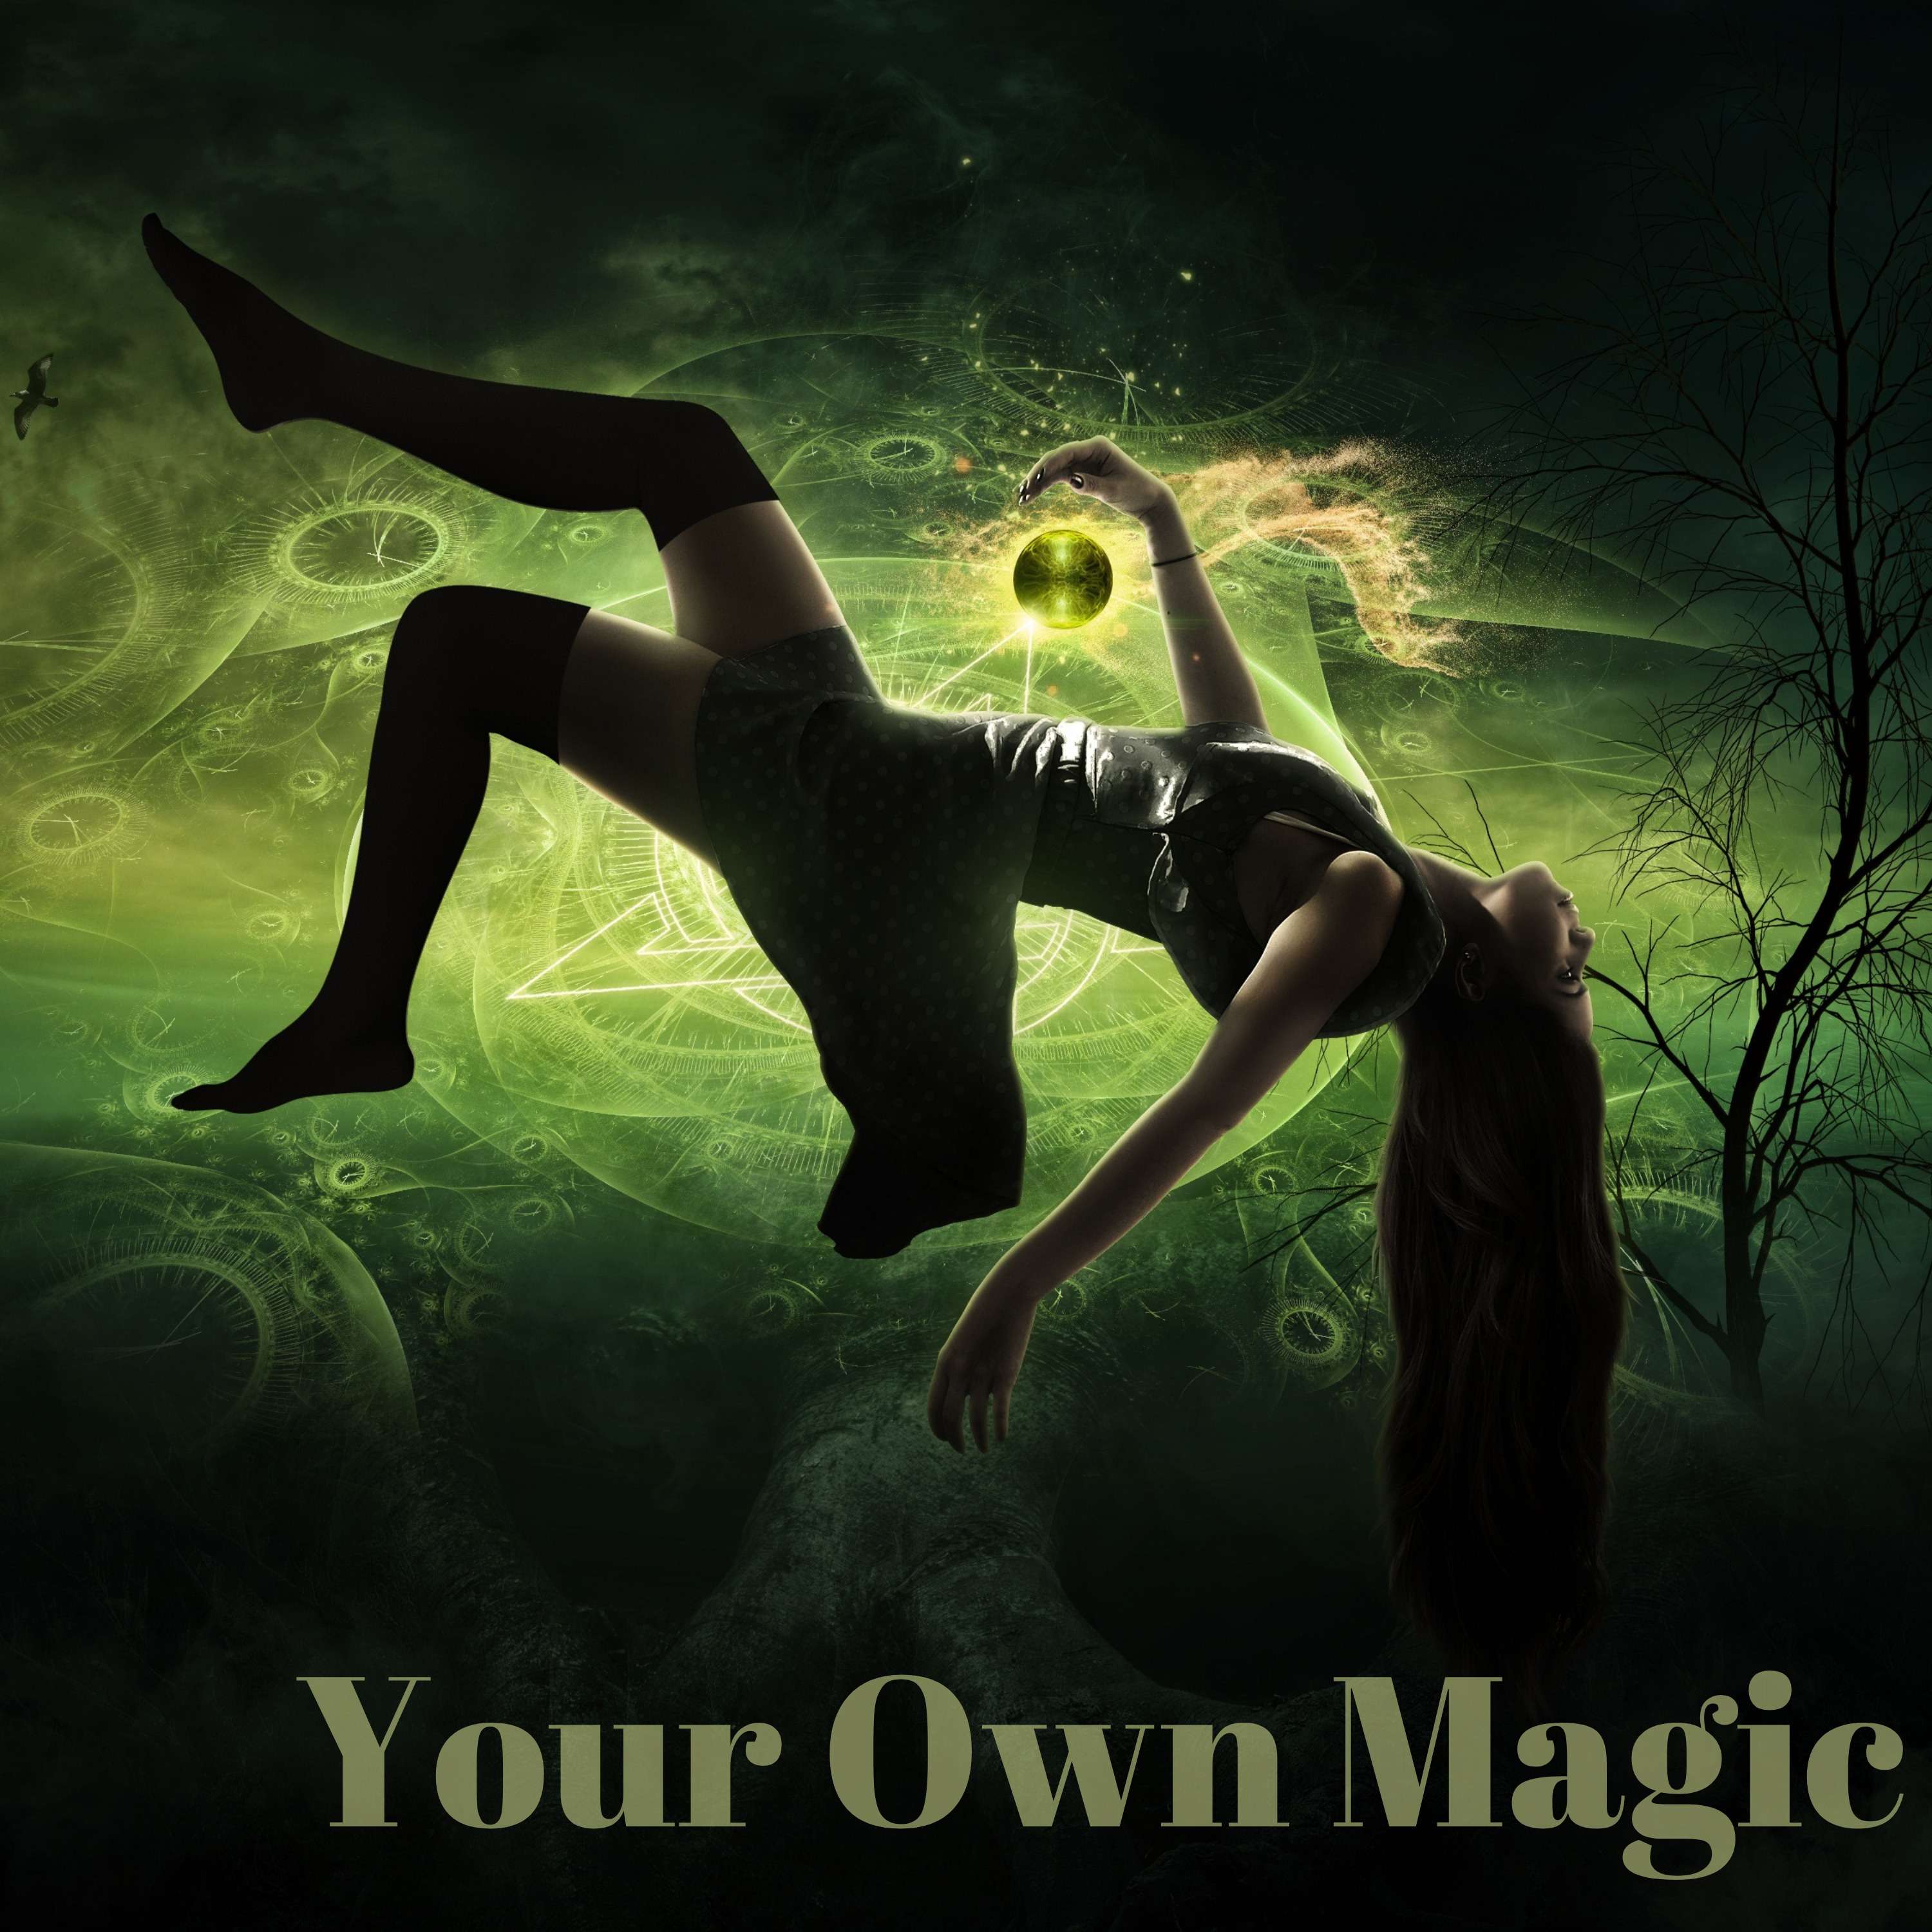 43: Your Own Magic